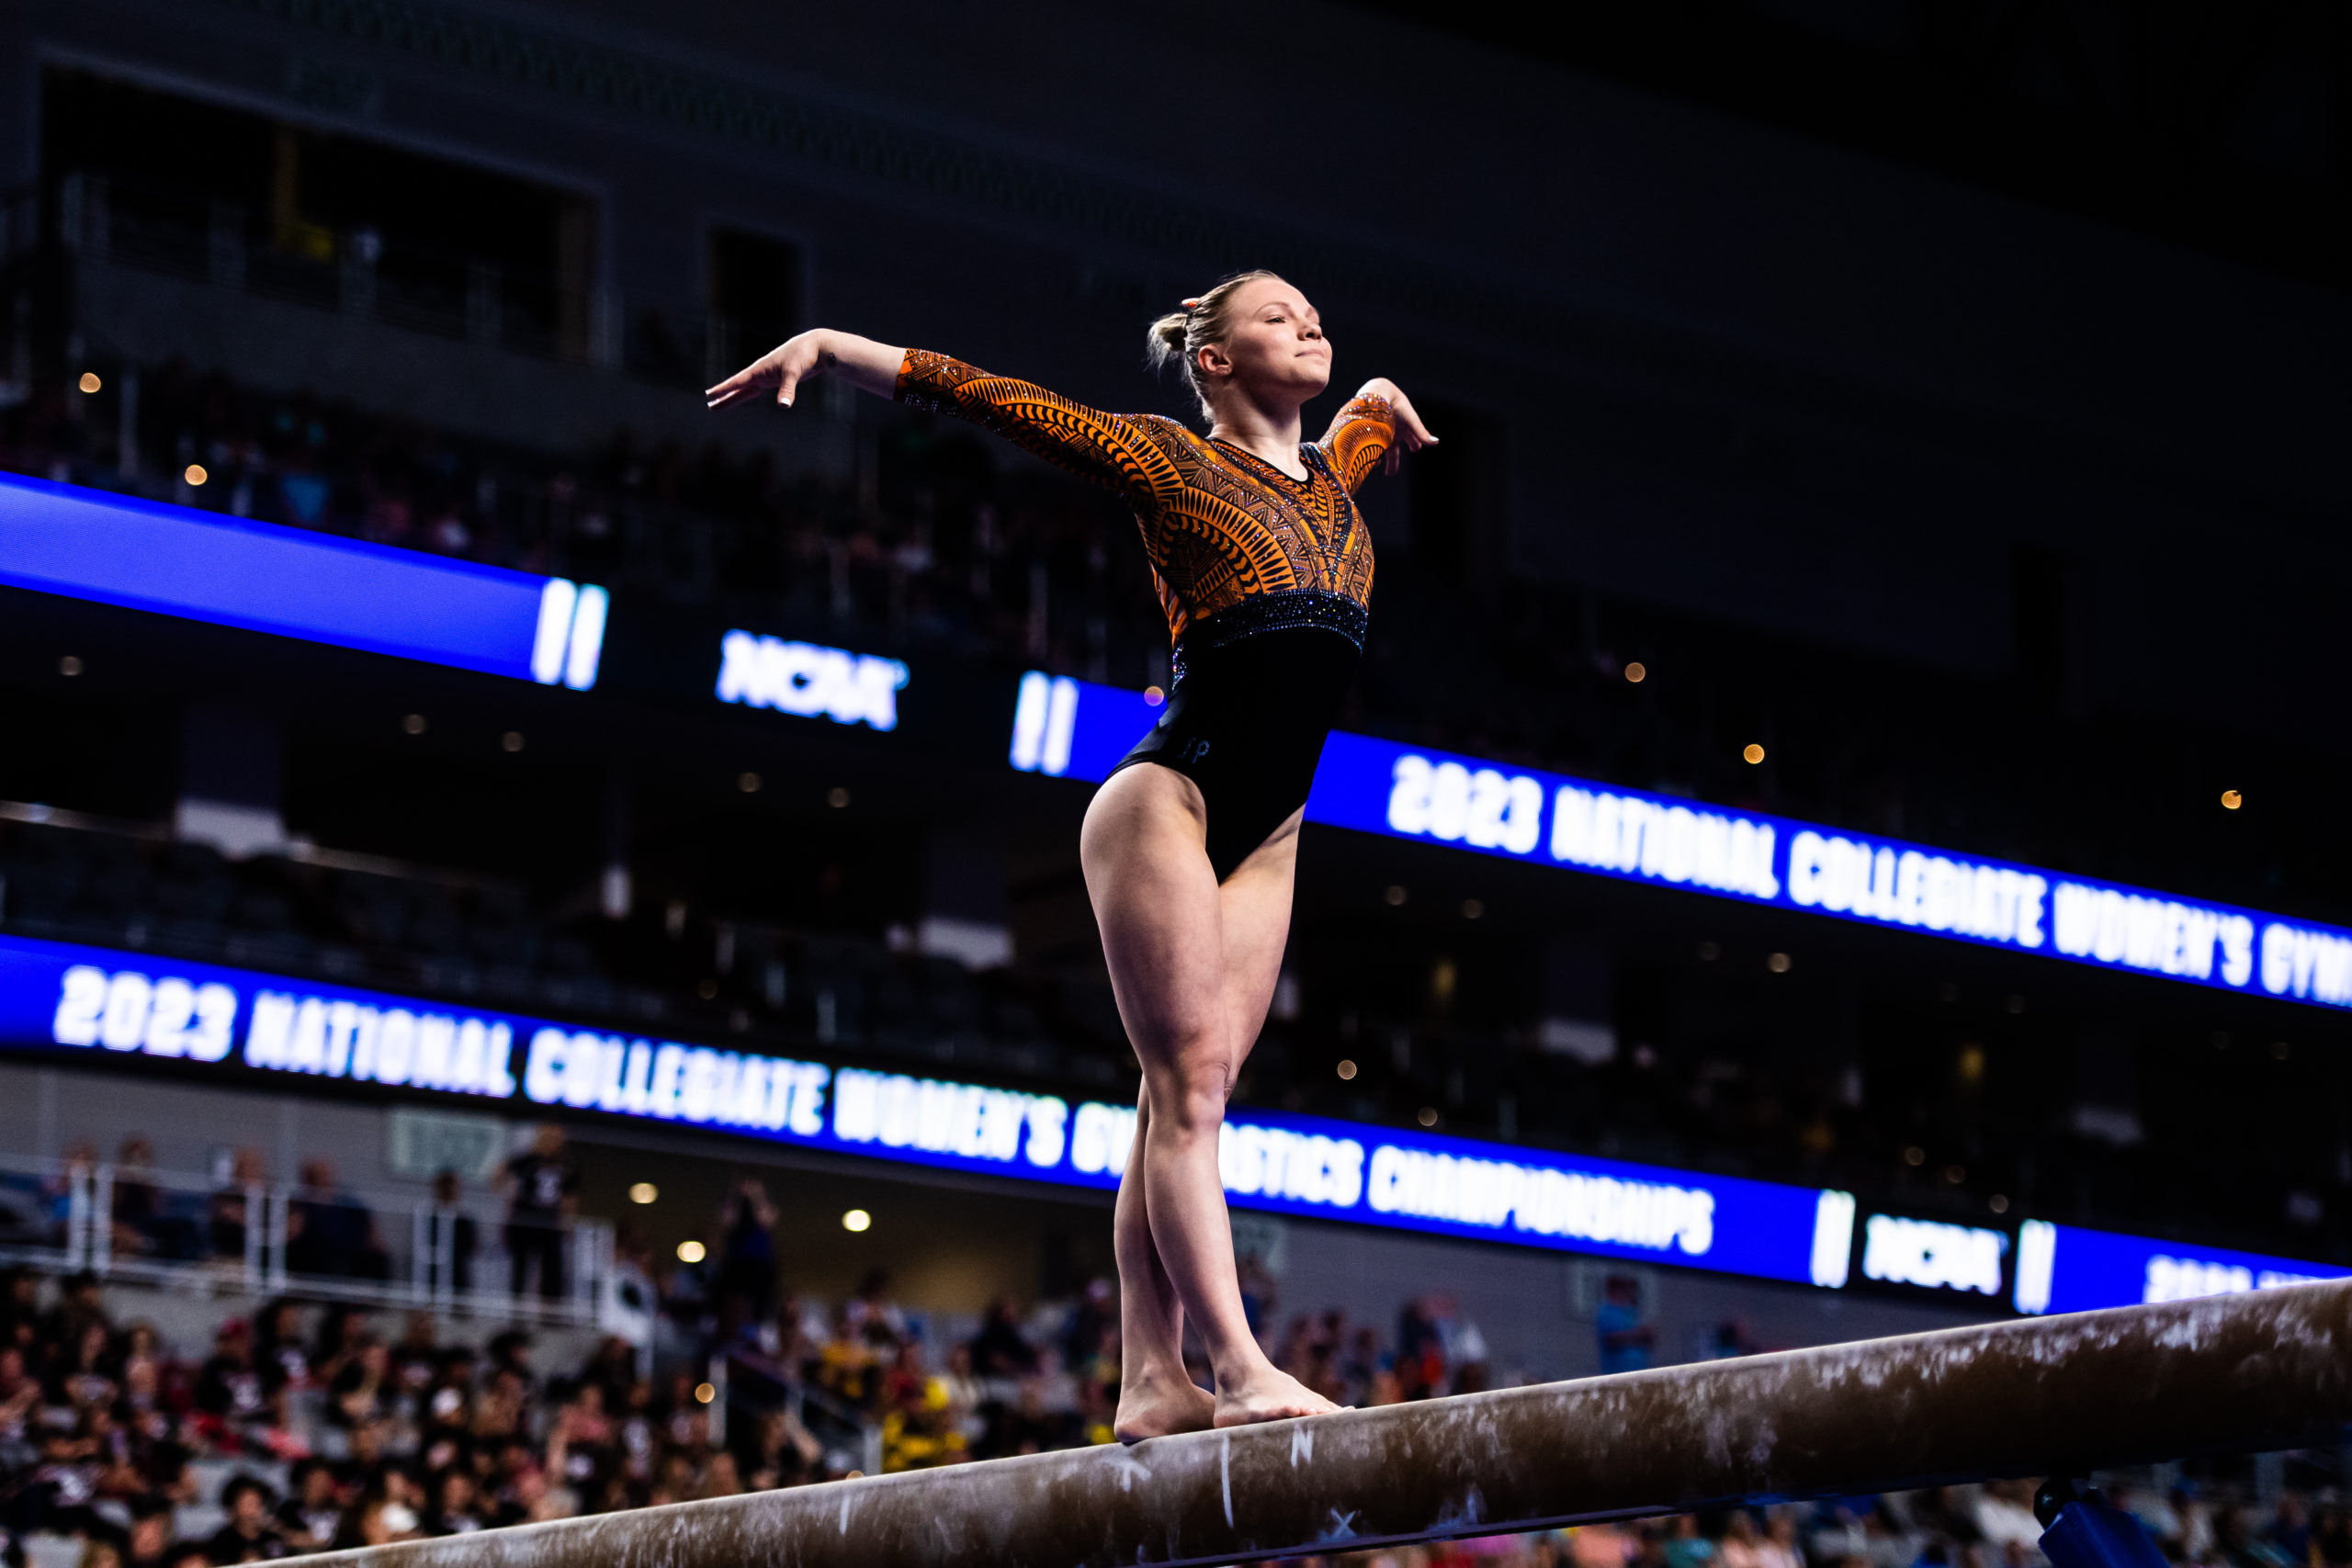 Jade Carey will compete in NCAA gymnastics while training for Paris